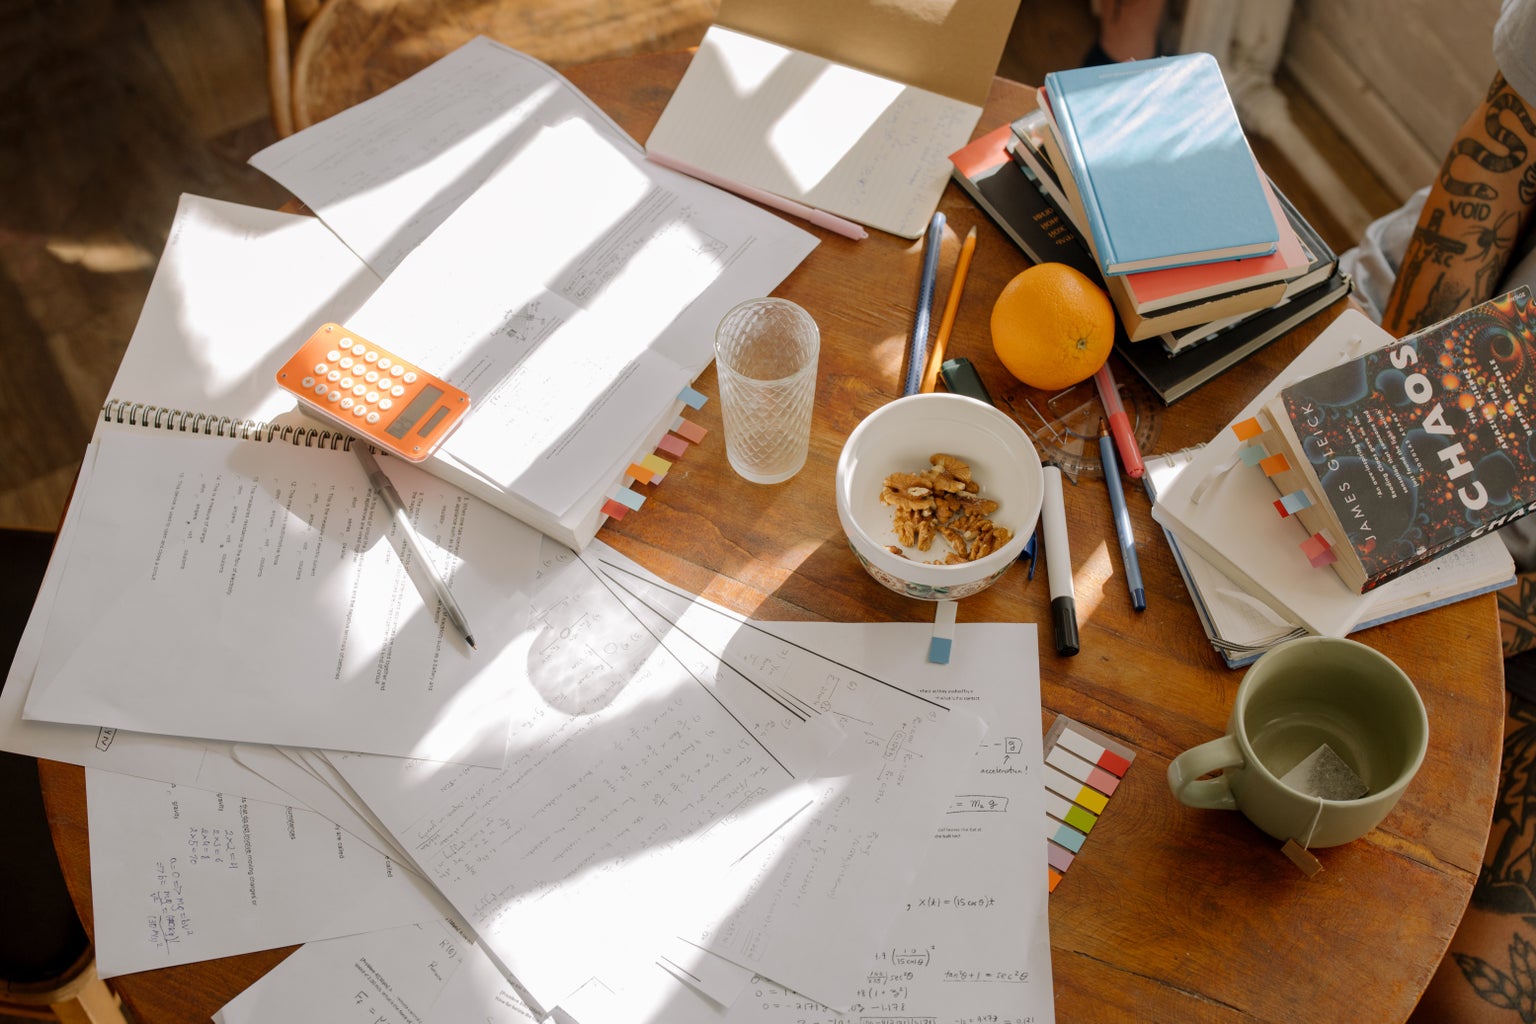 books, paper, and a mug scattered on the table